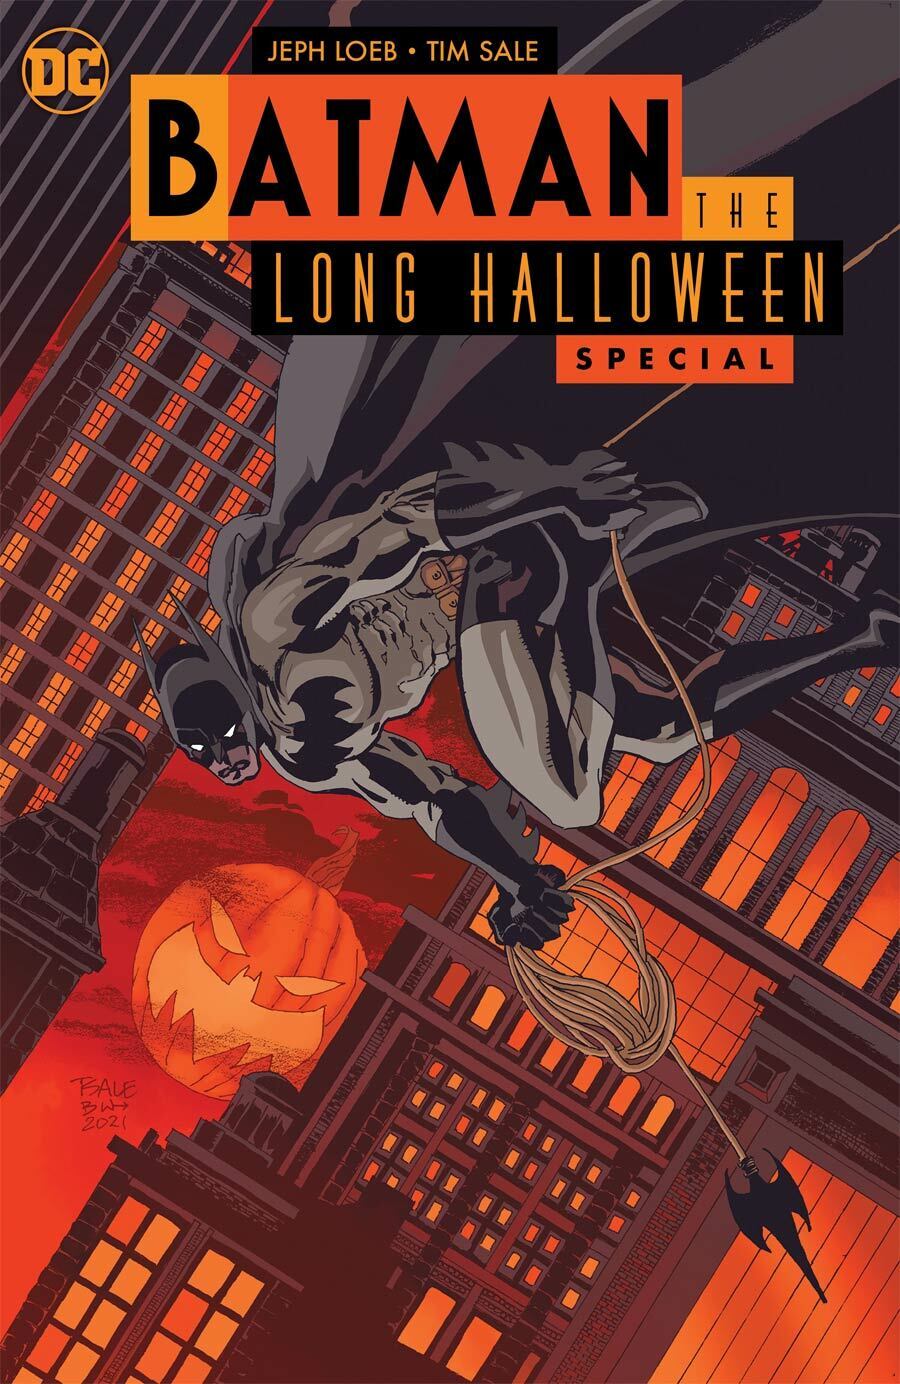 Batman The Long Halloween Special #1 (One Shot) Cover A Sale DC 10/26/21 EB83